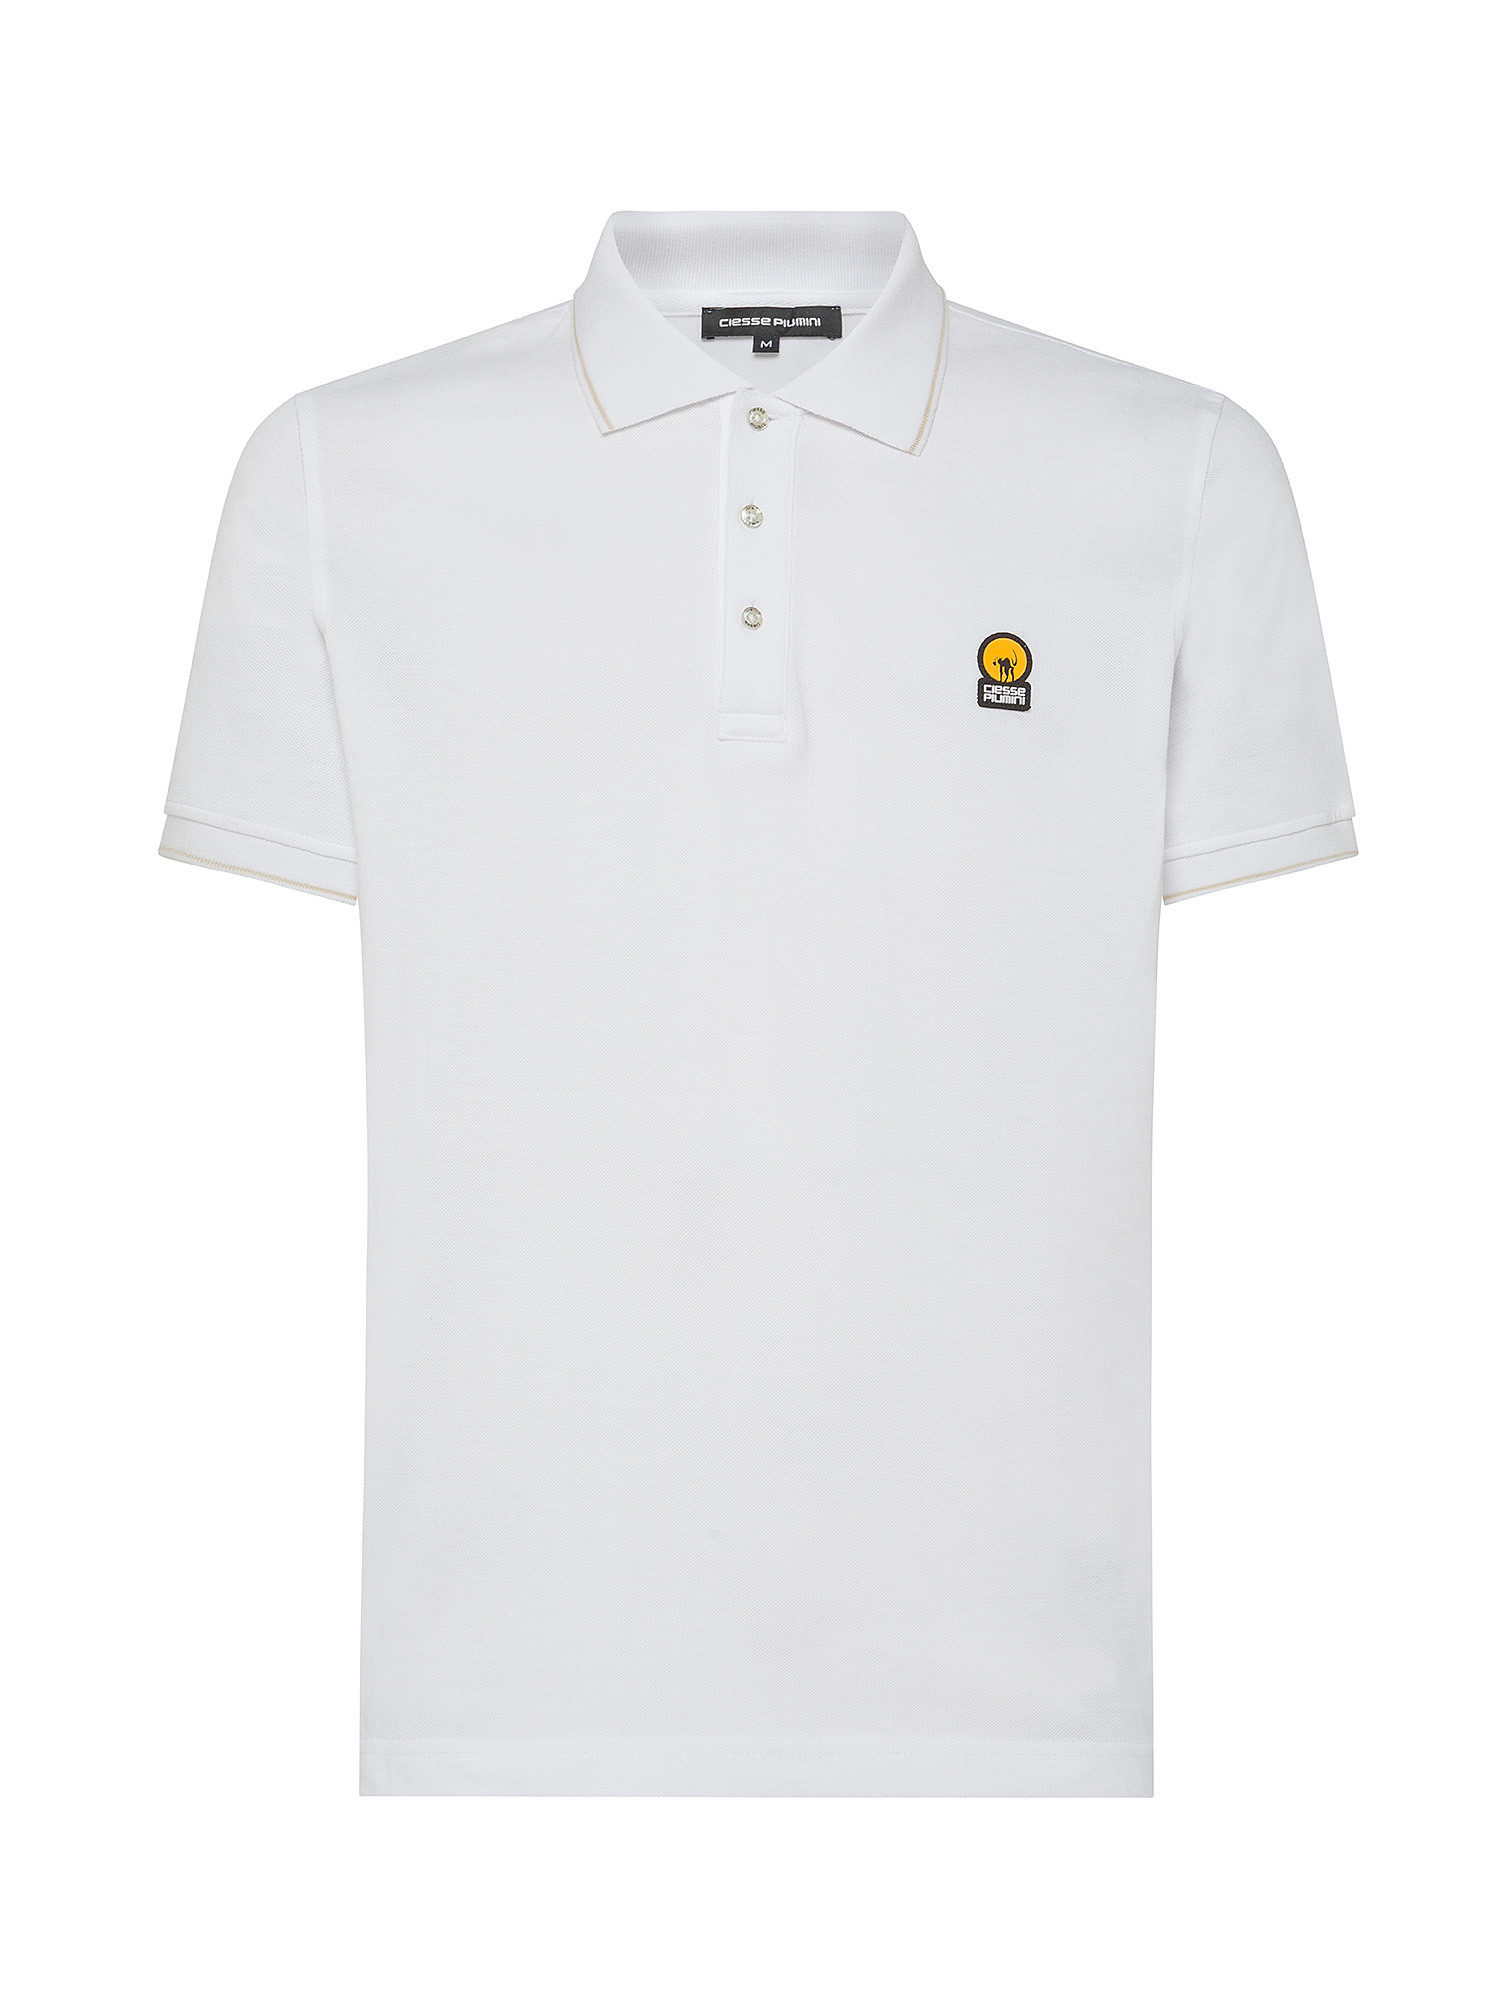 Ciesse Piumini - Piff polo shirt in cotton with logo, White, large image number 0